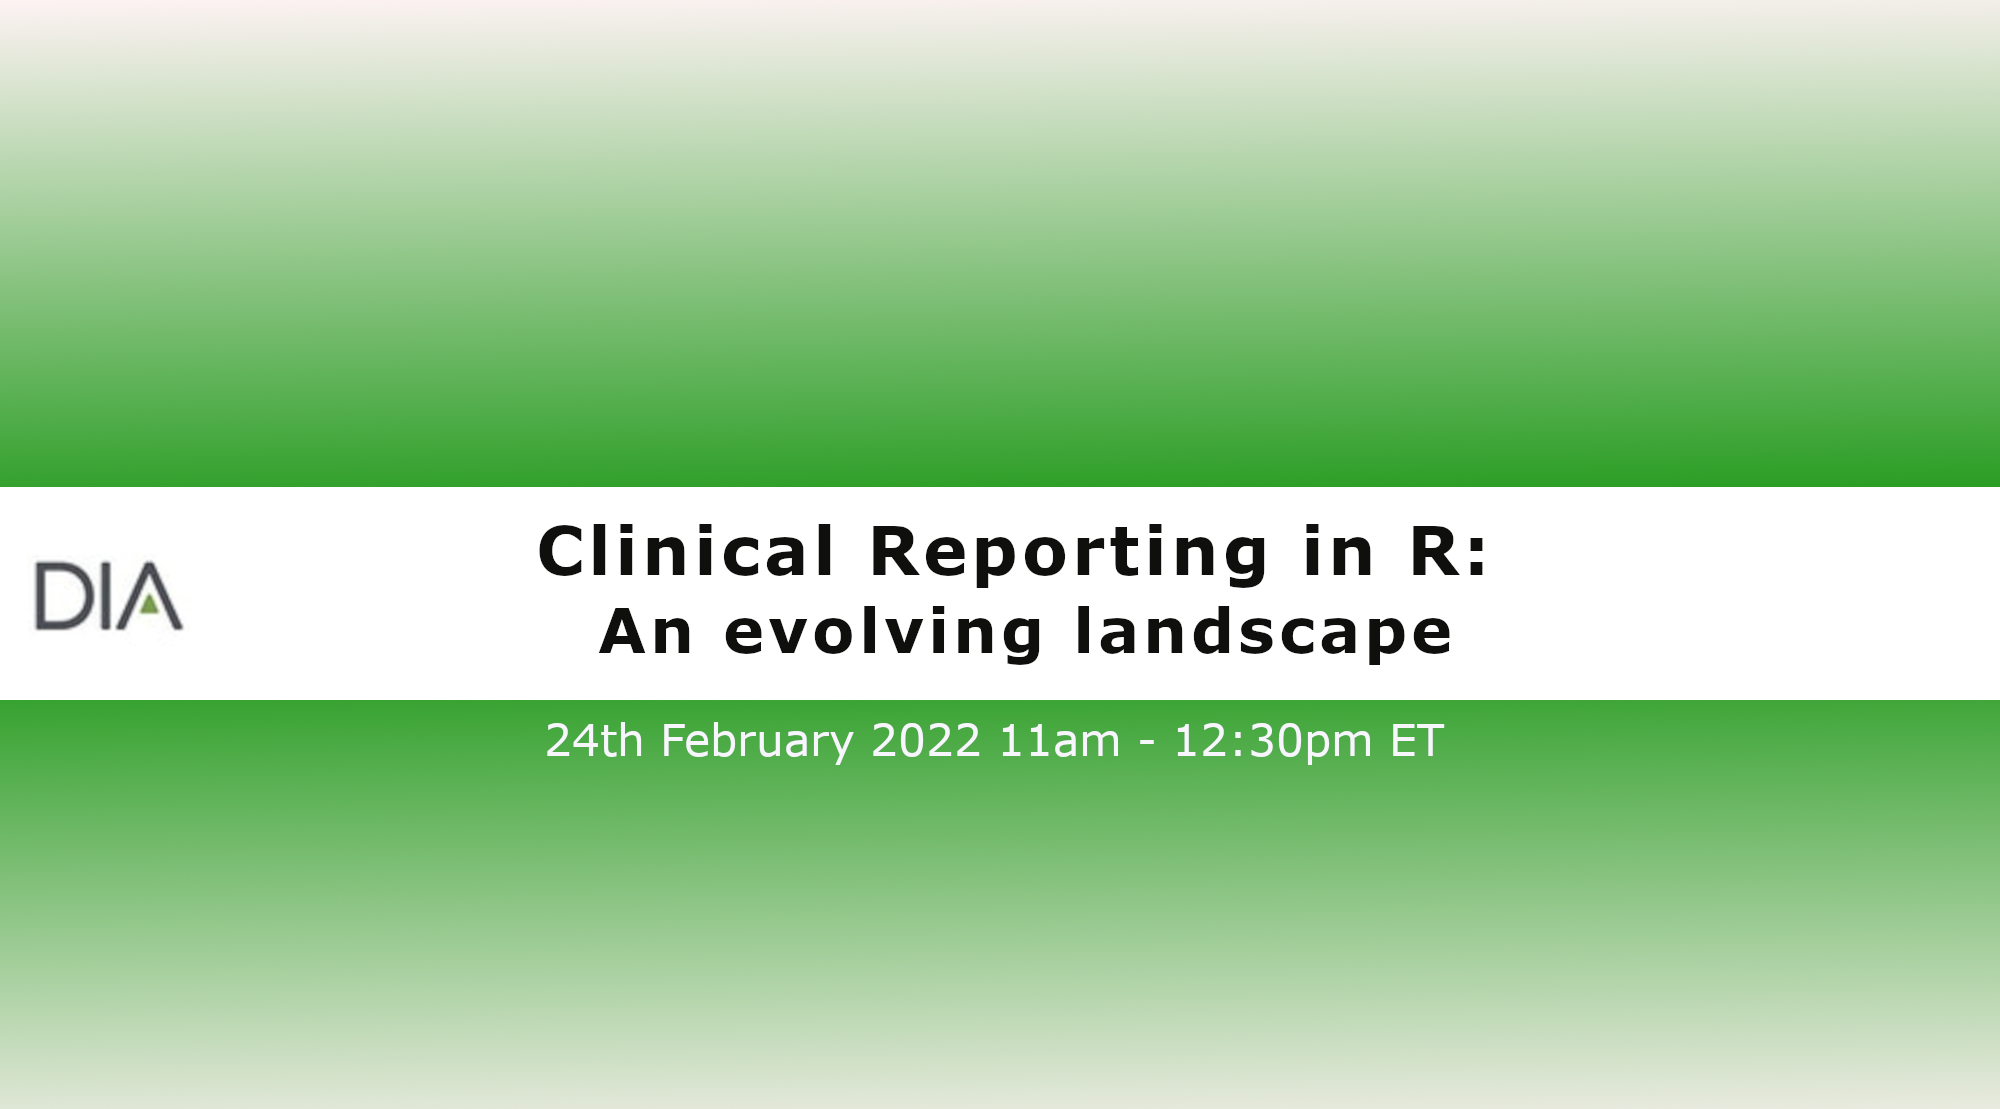 Webinar Clinical Reporting in R: An evolving landscape